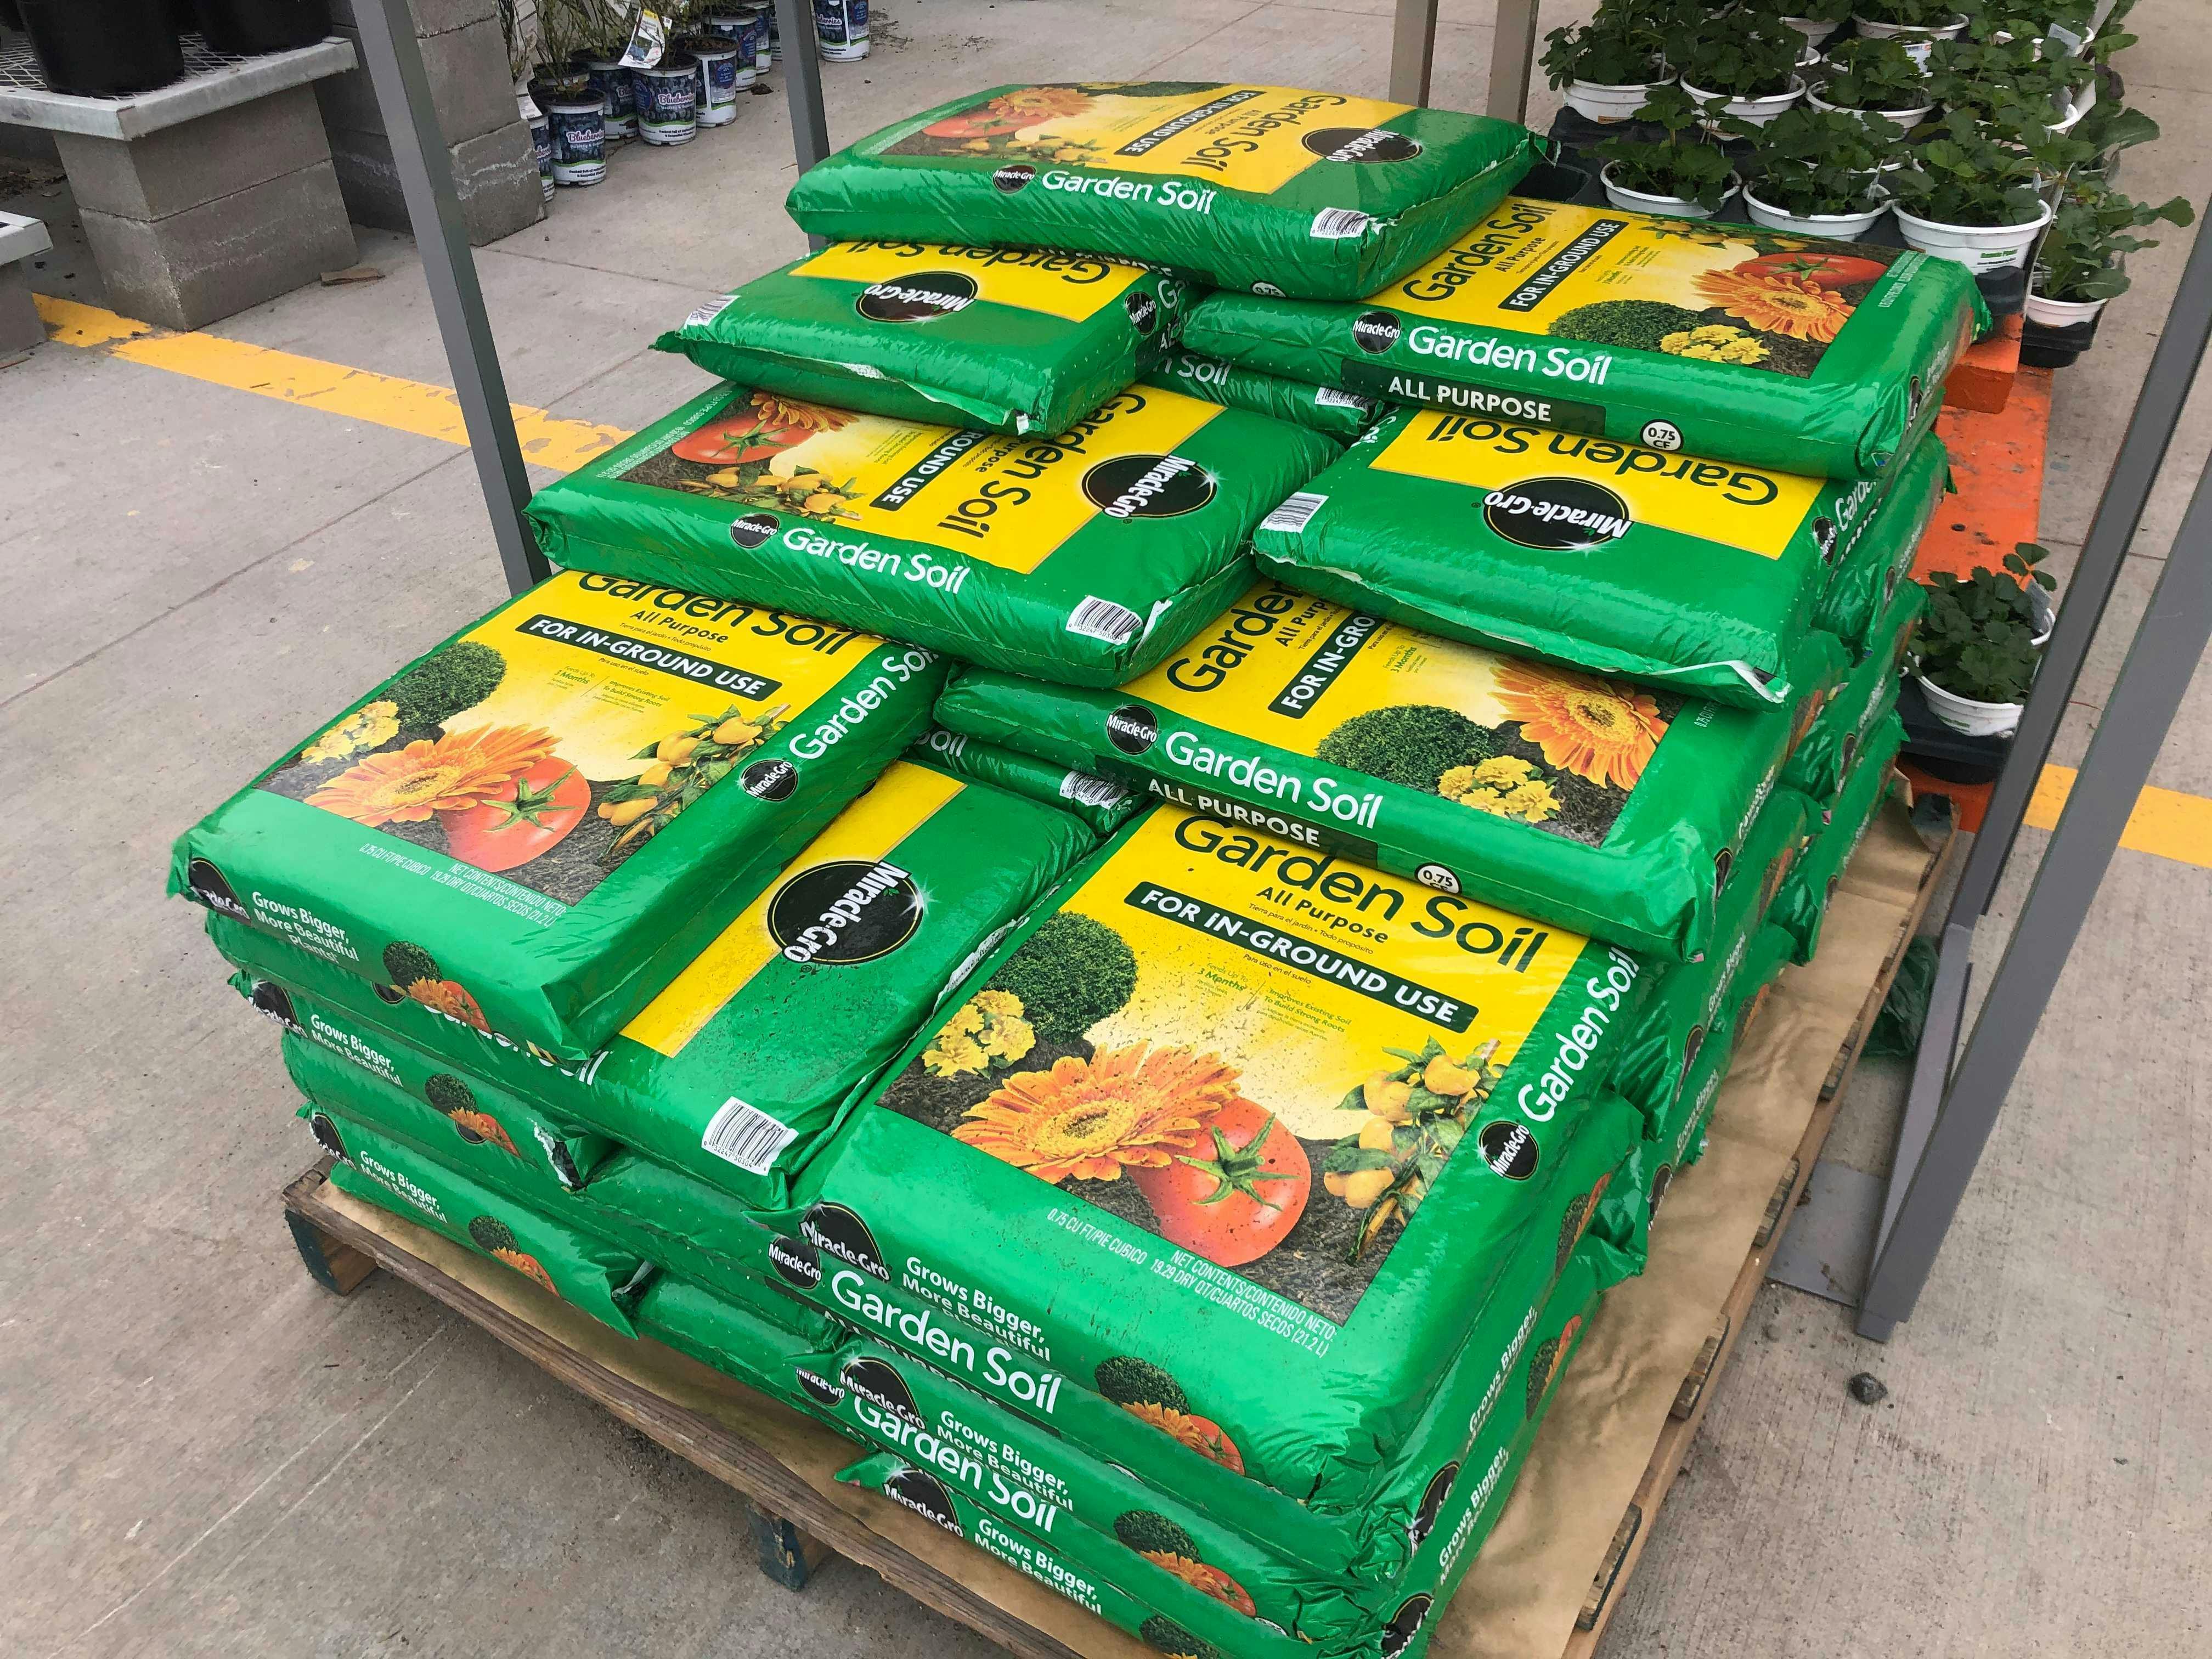 Home Depot Garden Soil 5 For 10 Home and Garden Reference